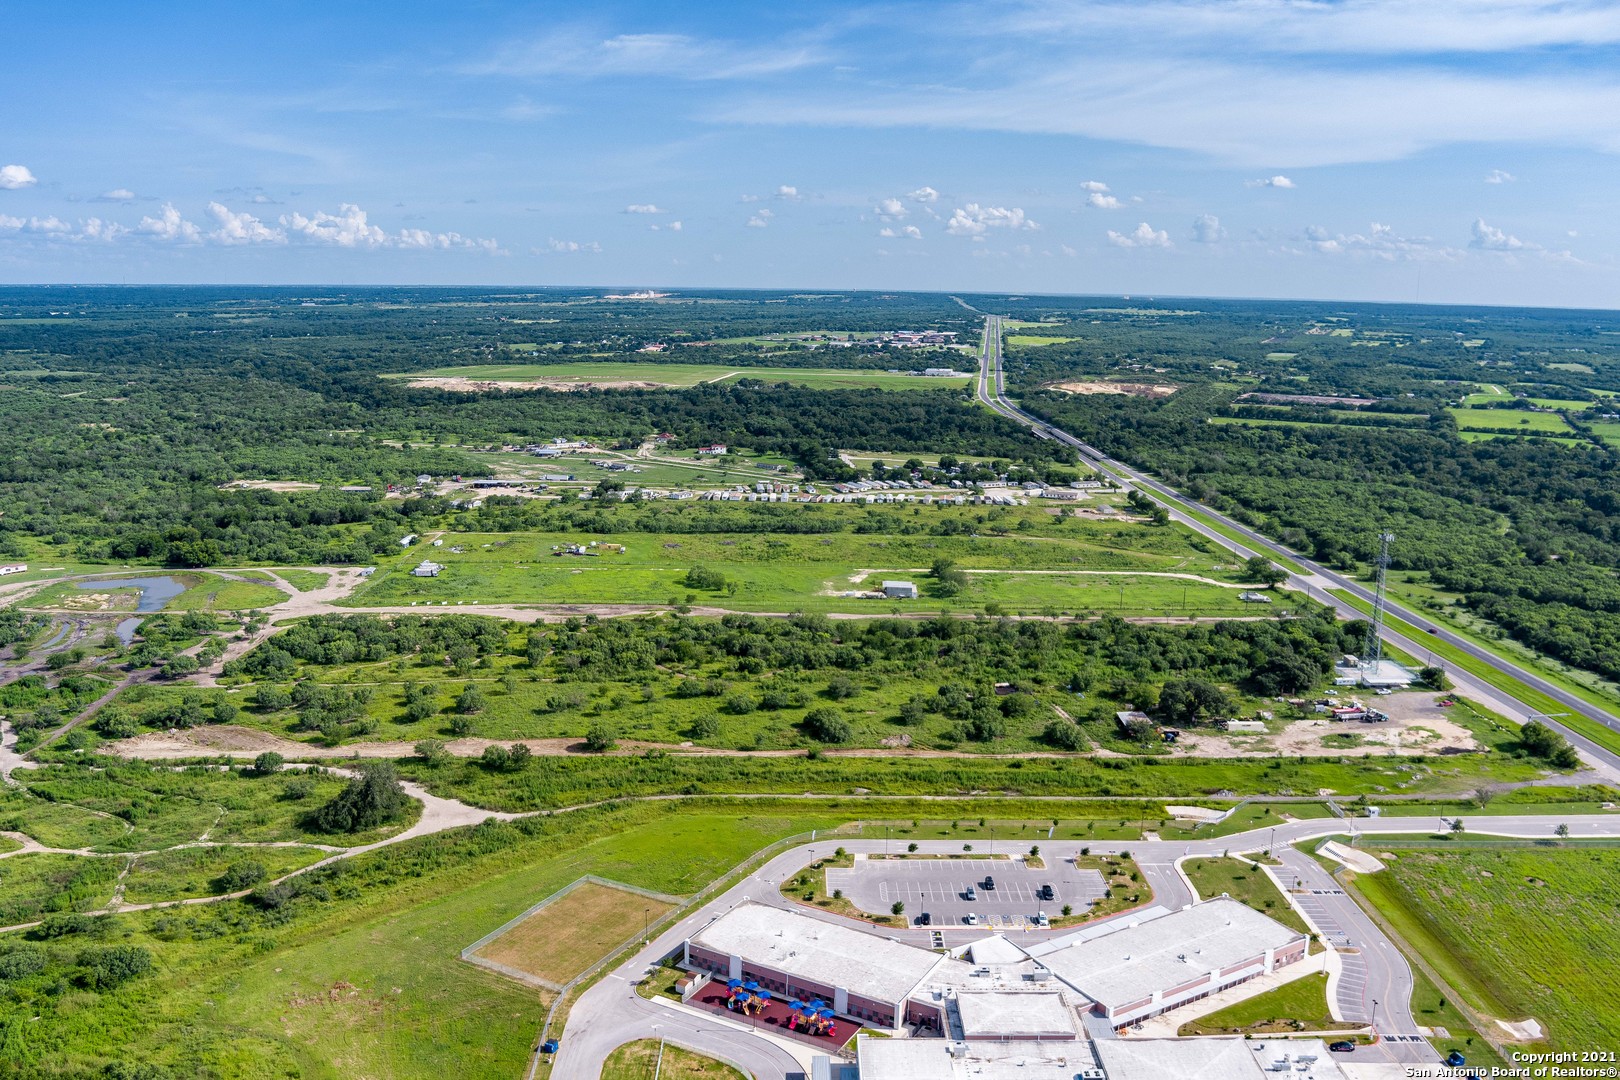 Add this Property 10 Acres located on Hwy 281 with 286 feet of frontage    your portfolio! Navistar International is approximately 1/2 mile north of the property.  Perfect for the next Vendor to build their warehouse. 10 Acres located on Hwy 281 with 286 feet of frontage.   Located 18 miles from the San Antonio Airport.5 miles south of 410, 3 mies from the Mission Largo Golf Course.  Zoned OCL with NO Flood zone.  Owner has an active Well and Electricity. access to city water and 5G right outside the property.  Currently used as a Construction office.  City water is located 5 feet outside property.  Owner has guard dogs pls call to view property.